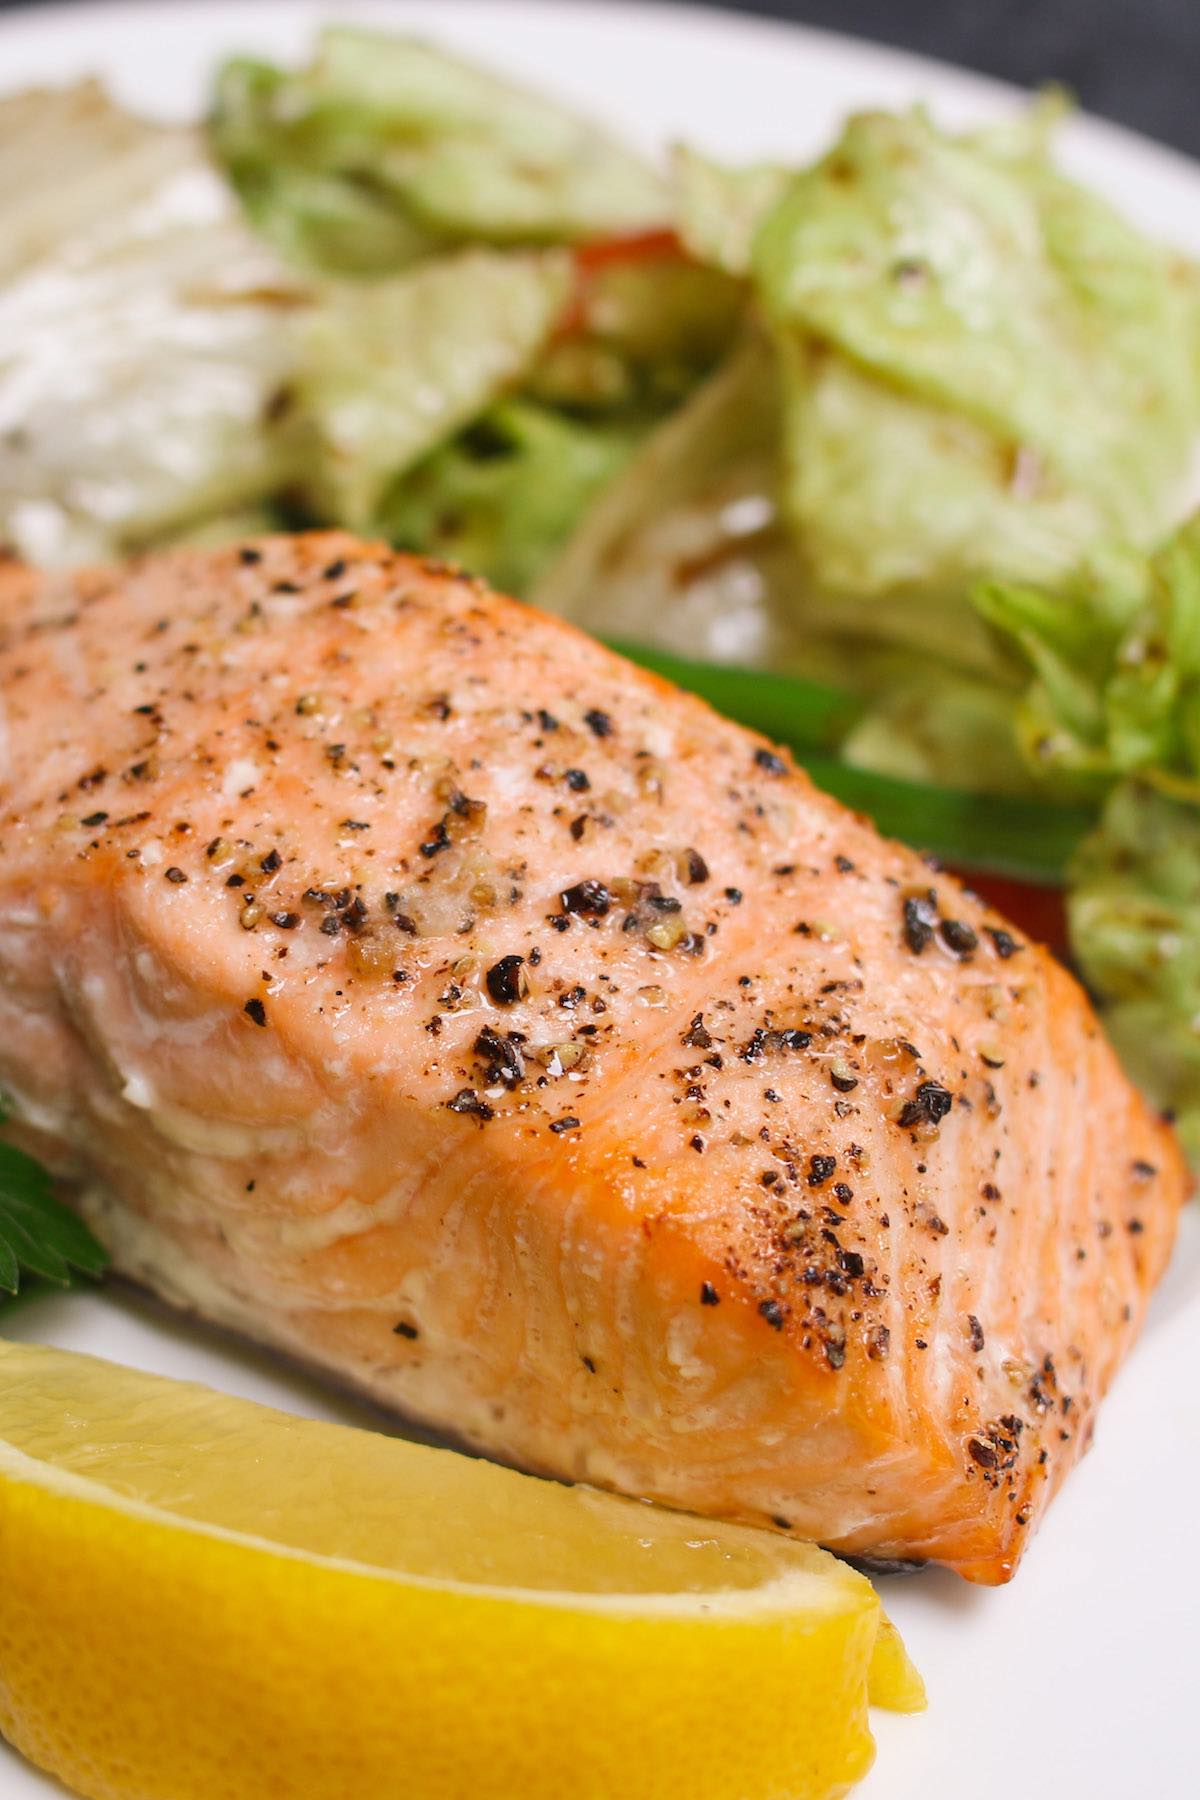 Closeup of baked fish with freshly cracked pepper on top and served with a side salad